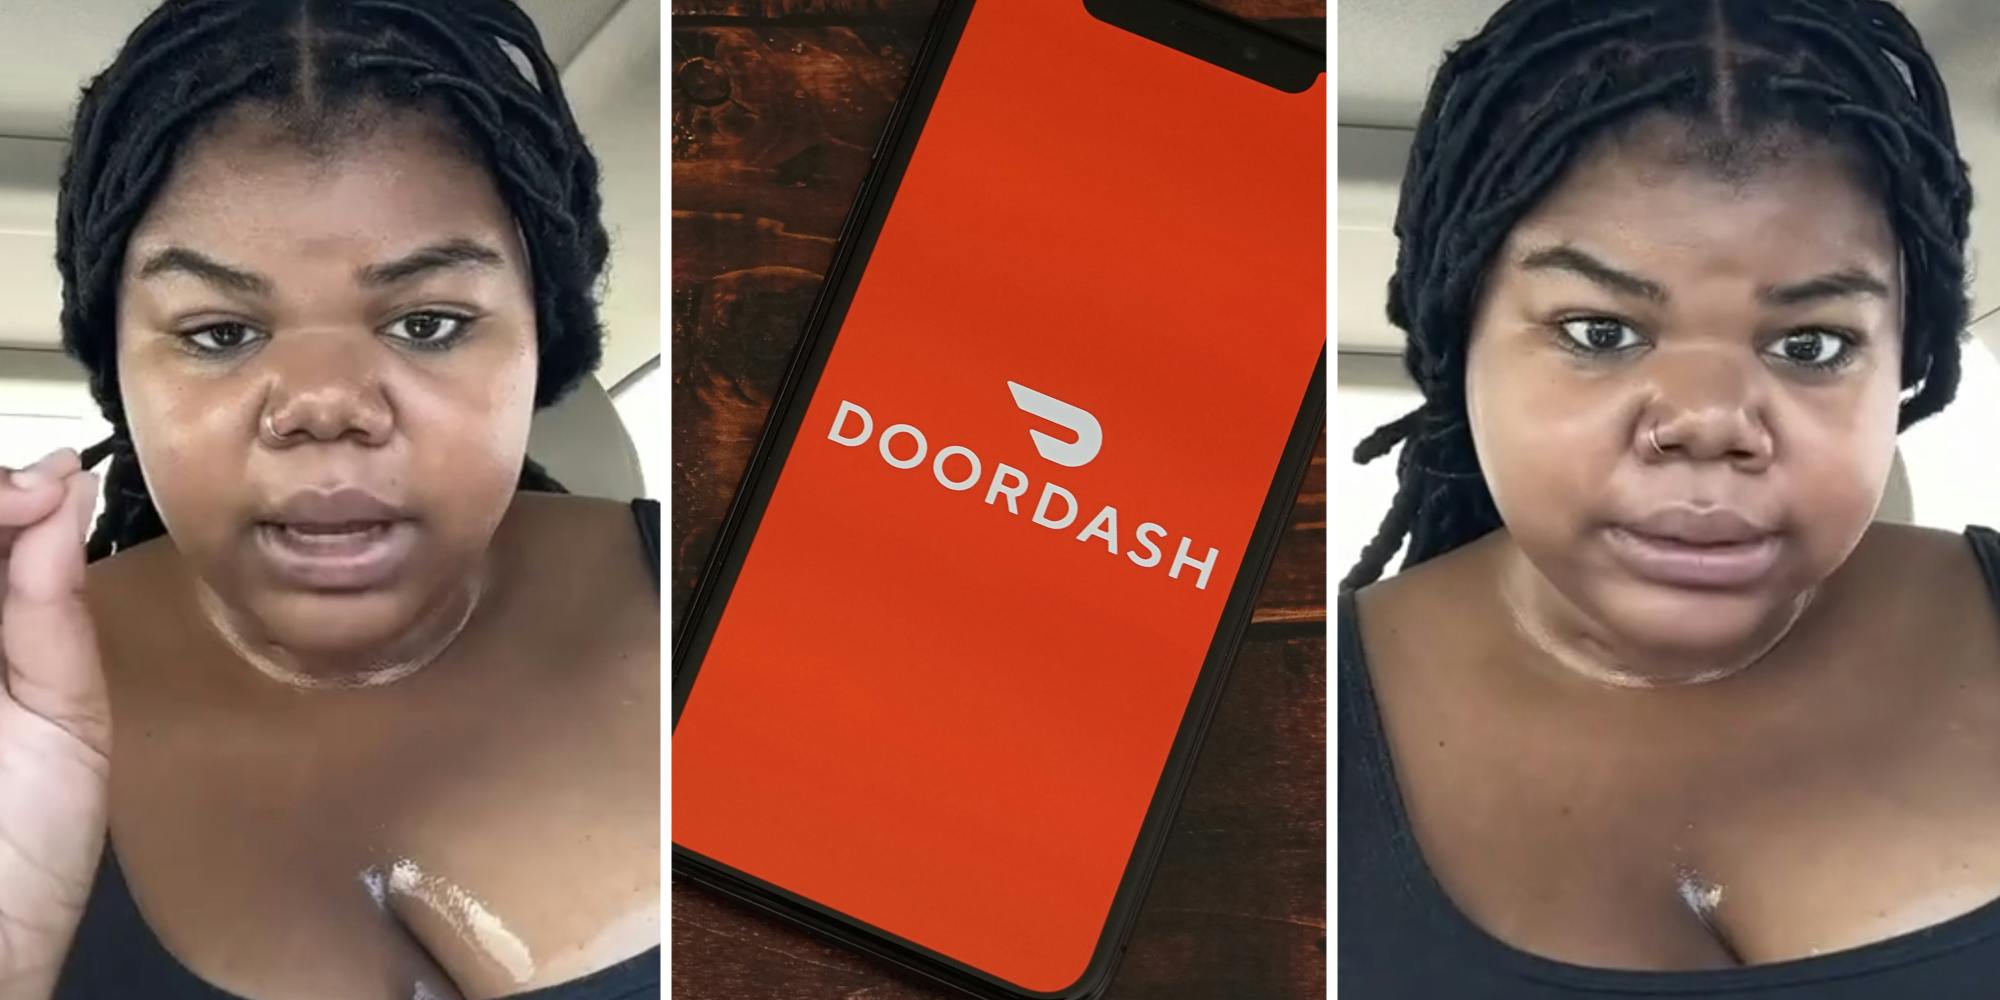 ‘That’s why I only accept $8 or higher’: DoorDash driver completes 10 orders in 2 hours. Her earnings are less than one meal